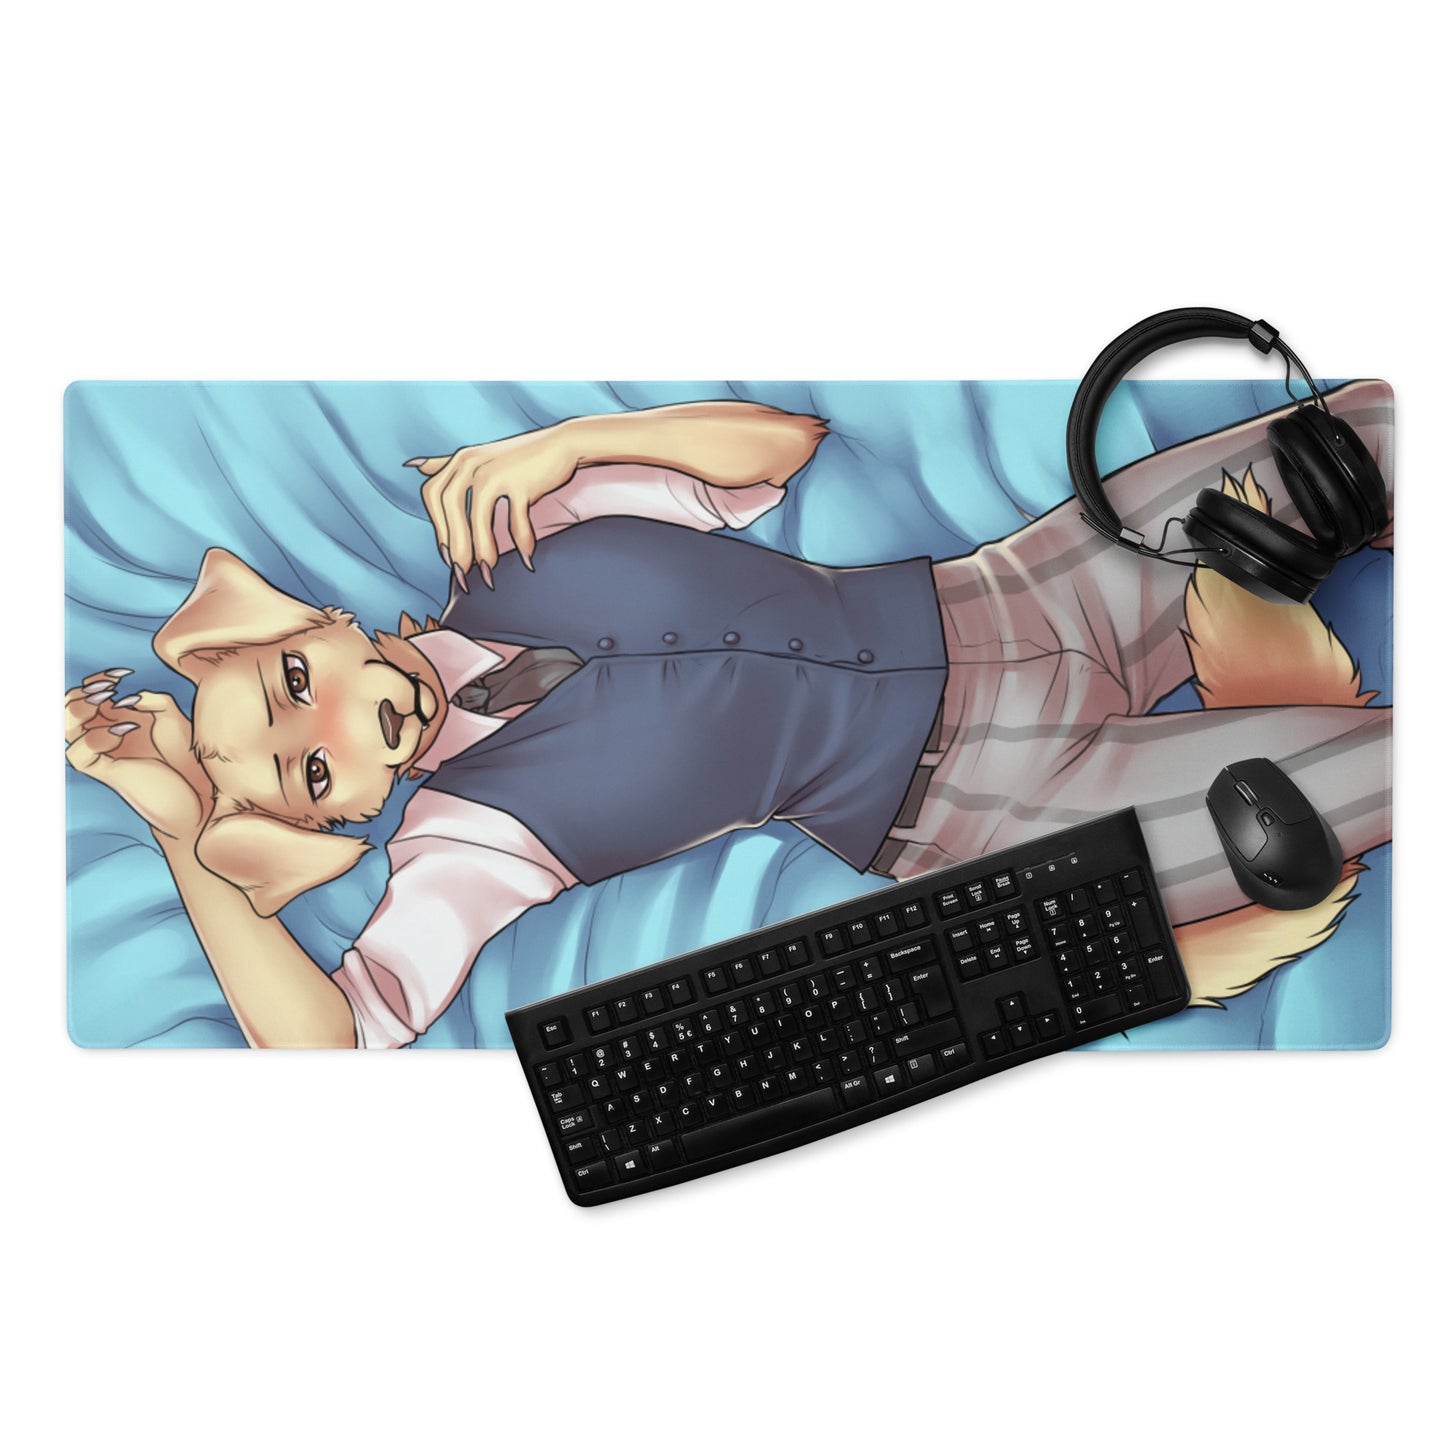 Jack (SFW) Gaming mouse pad Ver. 2